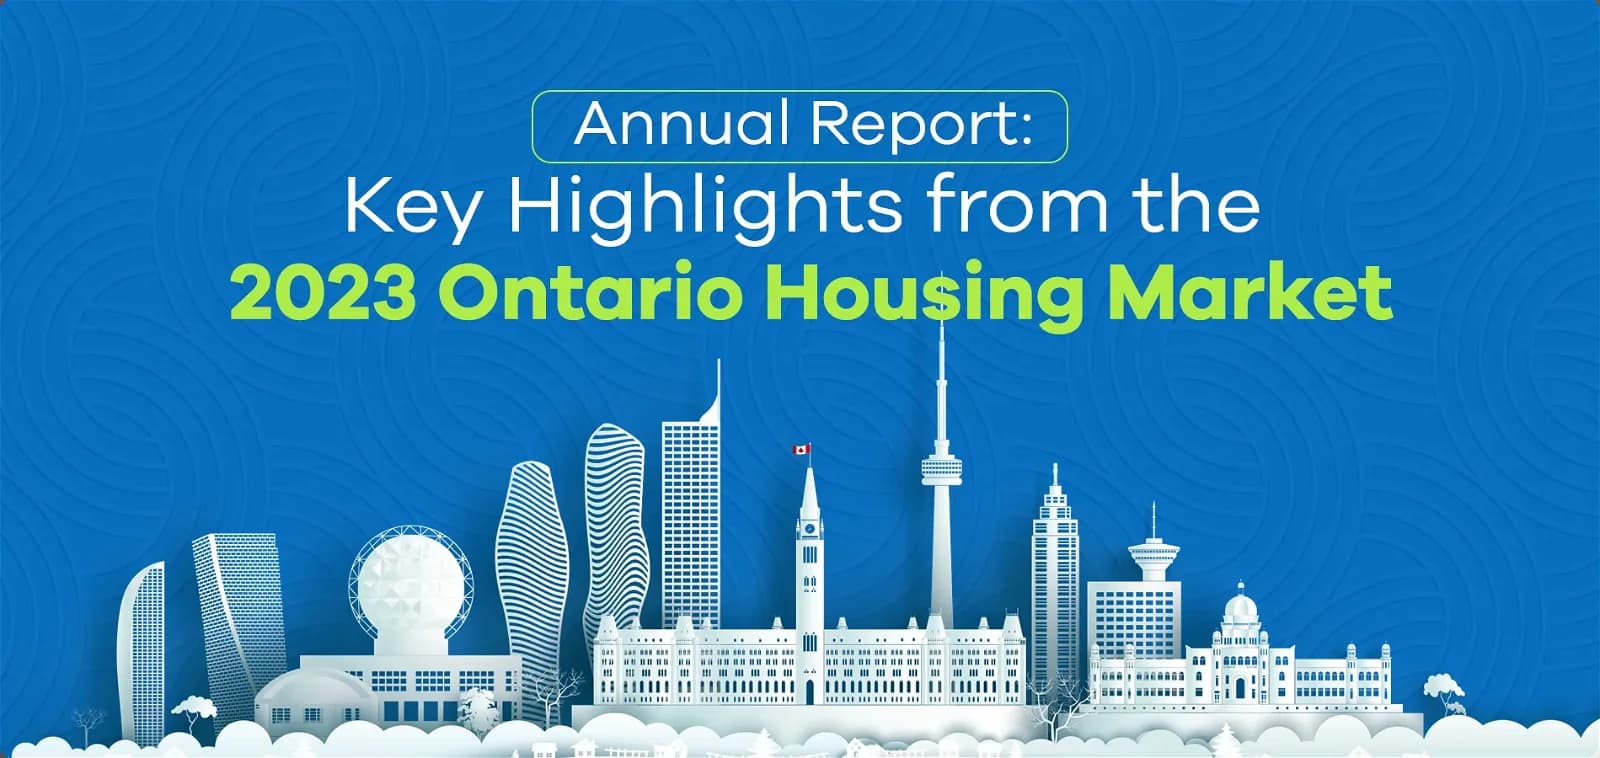 Annual Report: Key Highlights From the 2023 Ontario Housing Market